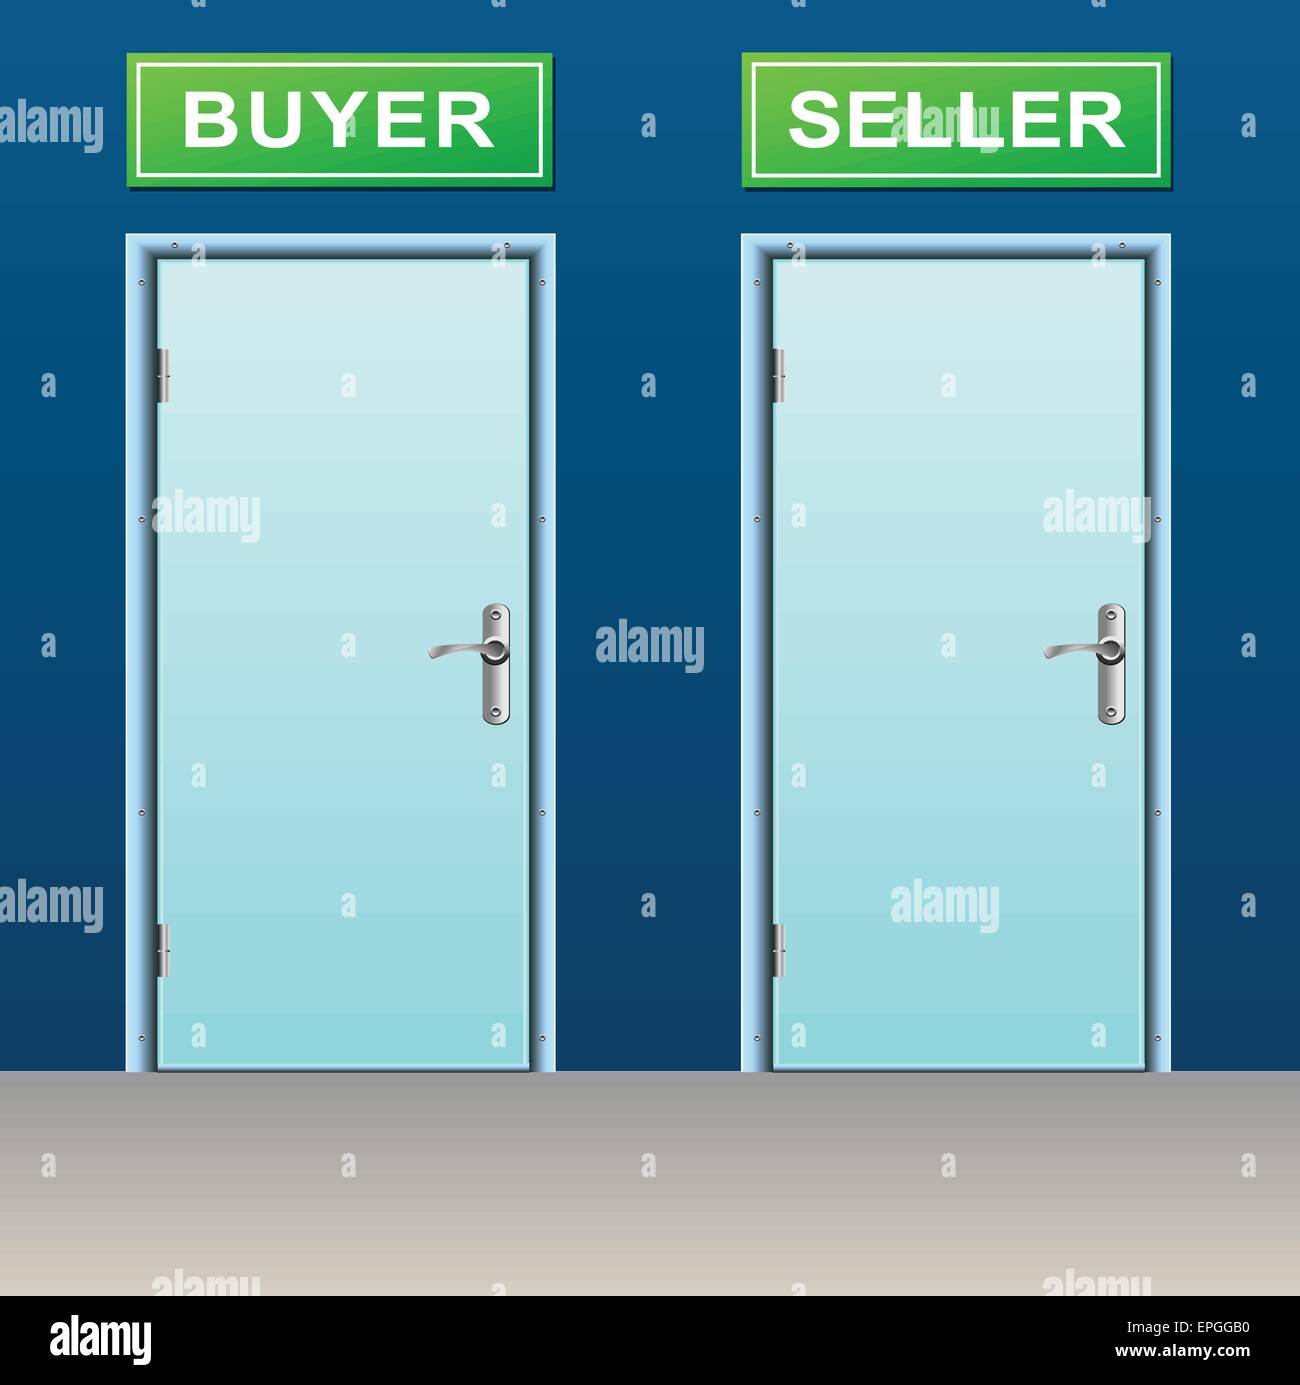 illustration of two doors for buyer and seller Stock Vector